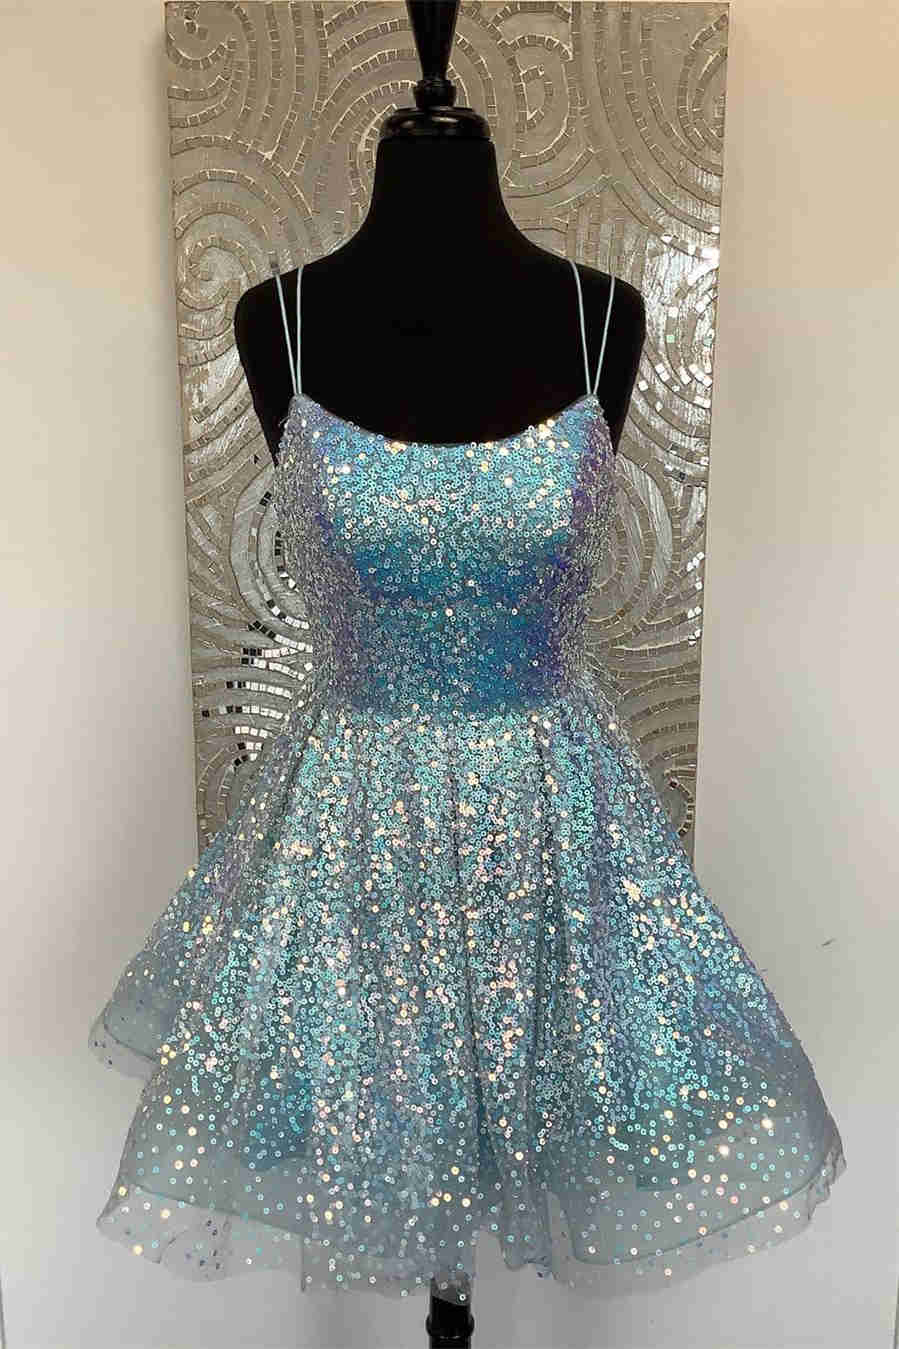 Cute Hot Pink Sequins A-Line Homecoming Dress Y1641